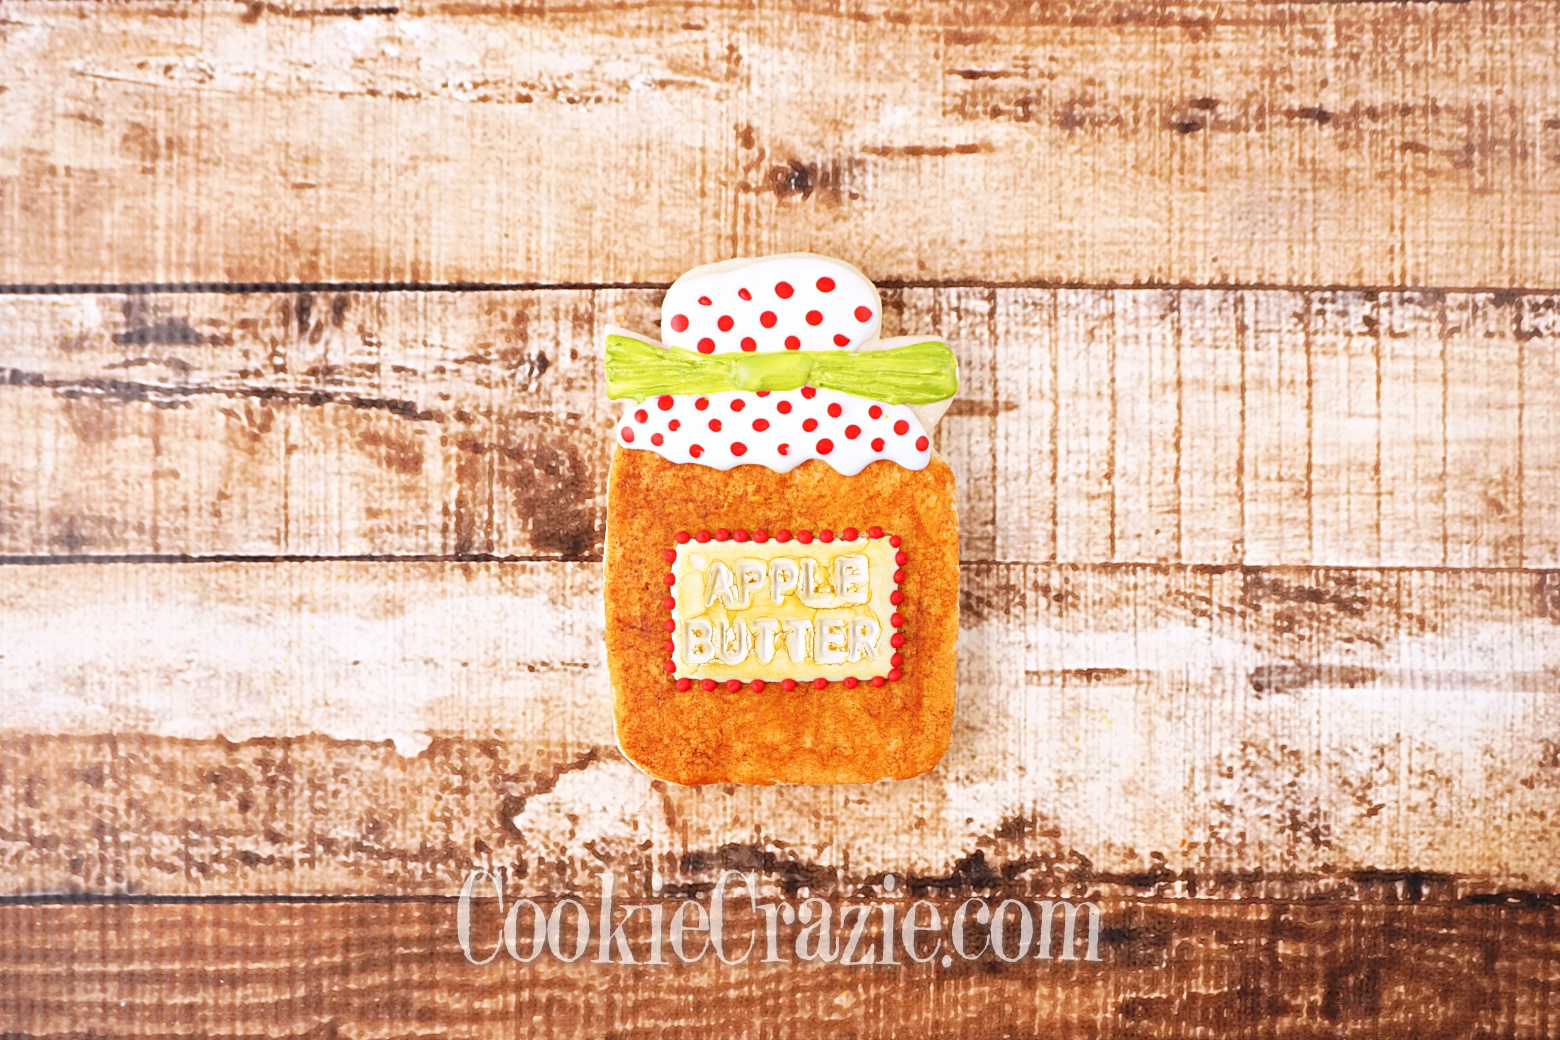  Apple Butter Jar Decorated Sugar Cookie YouTube video  HERE  